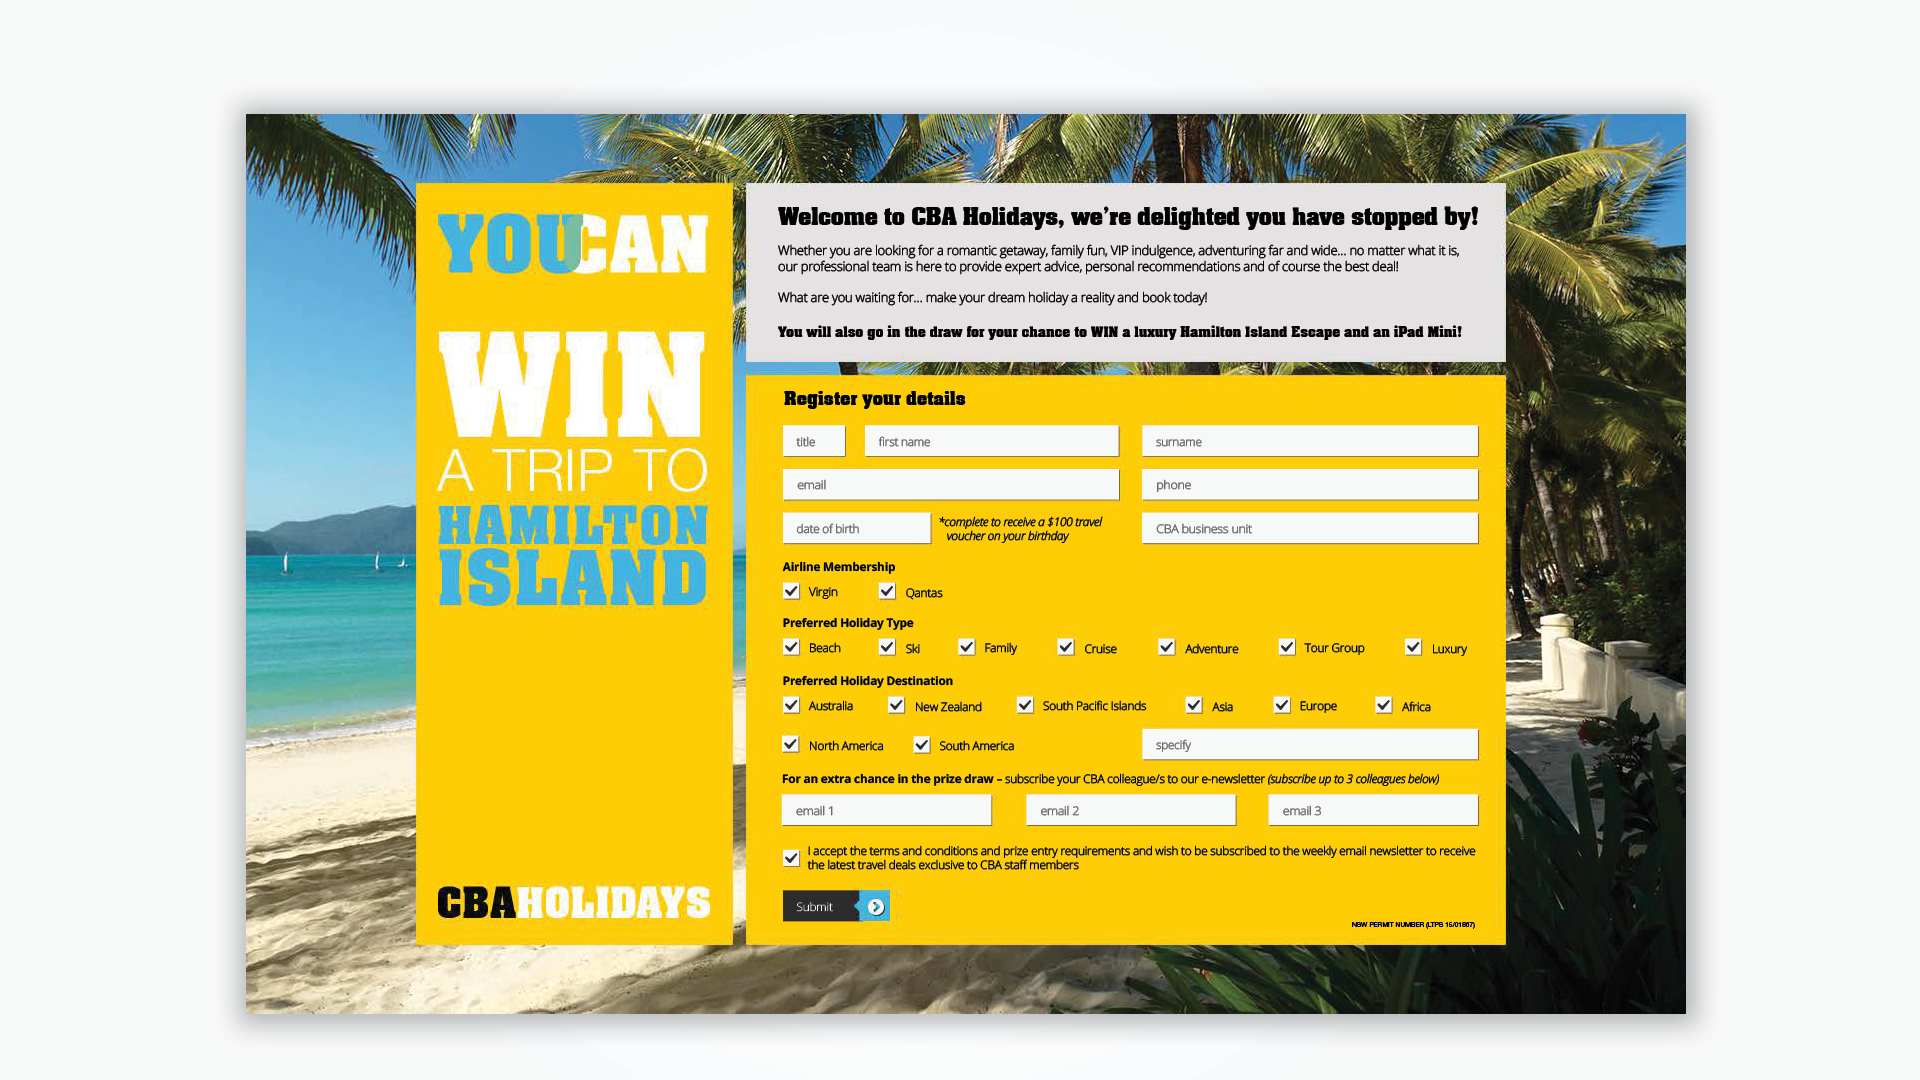 CommBank Holidays Microsite launch 2